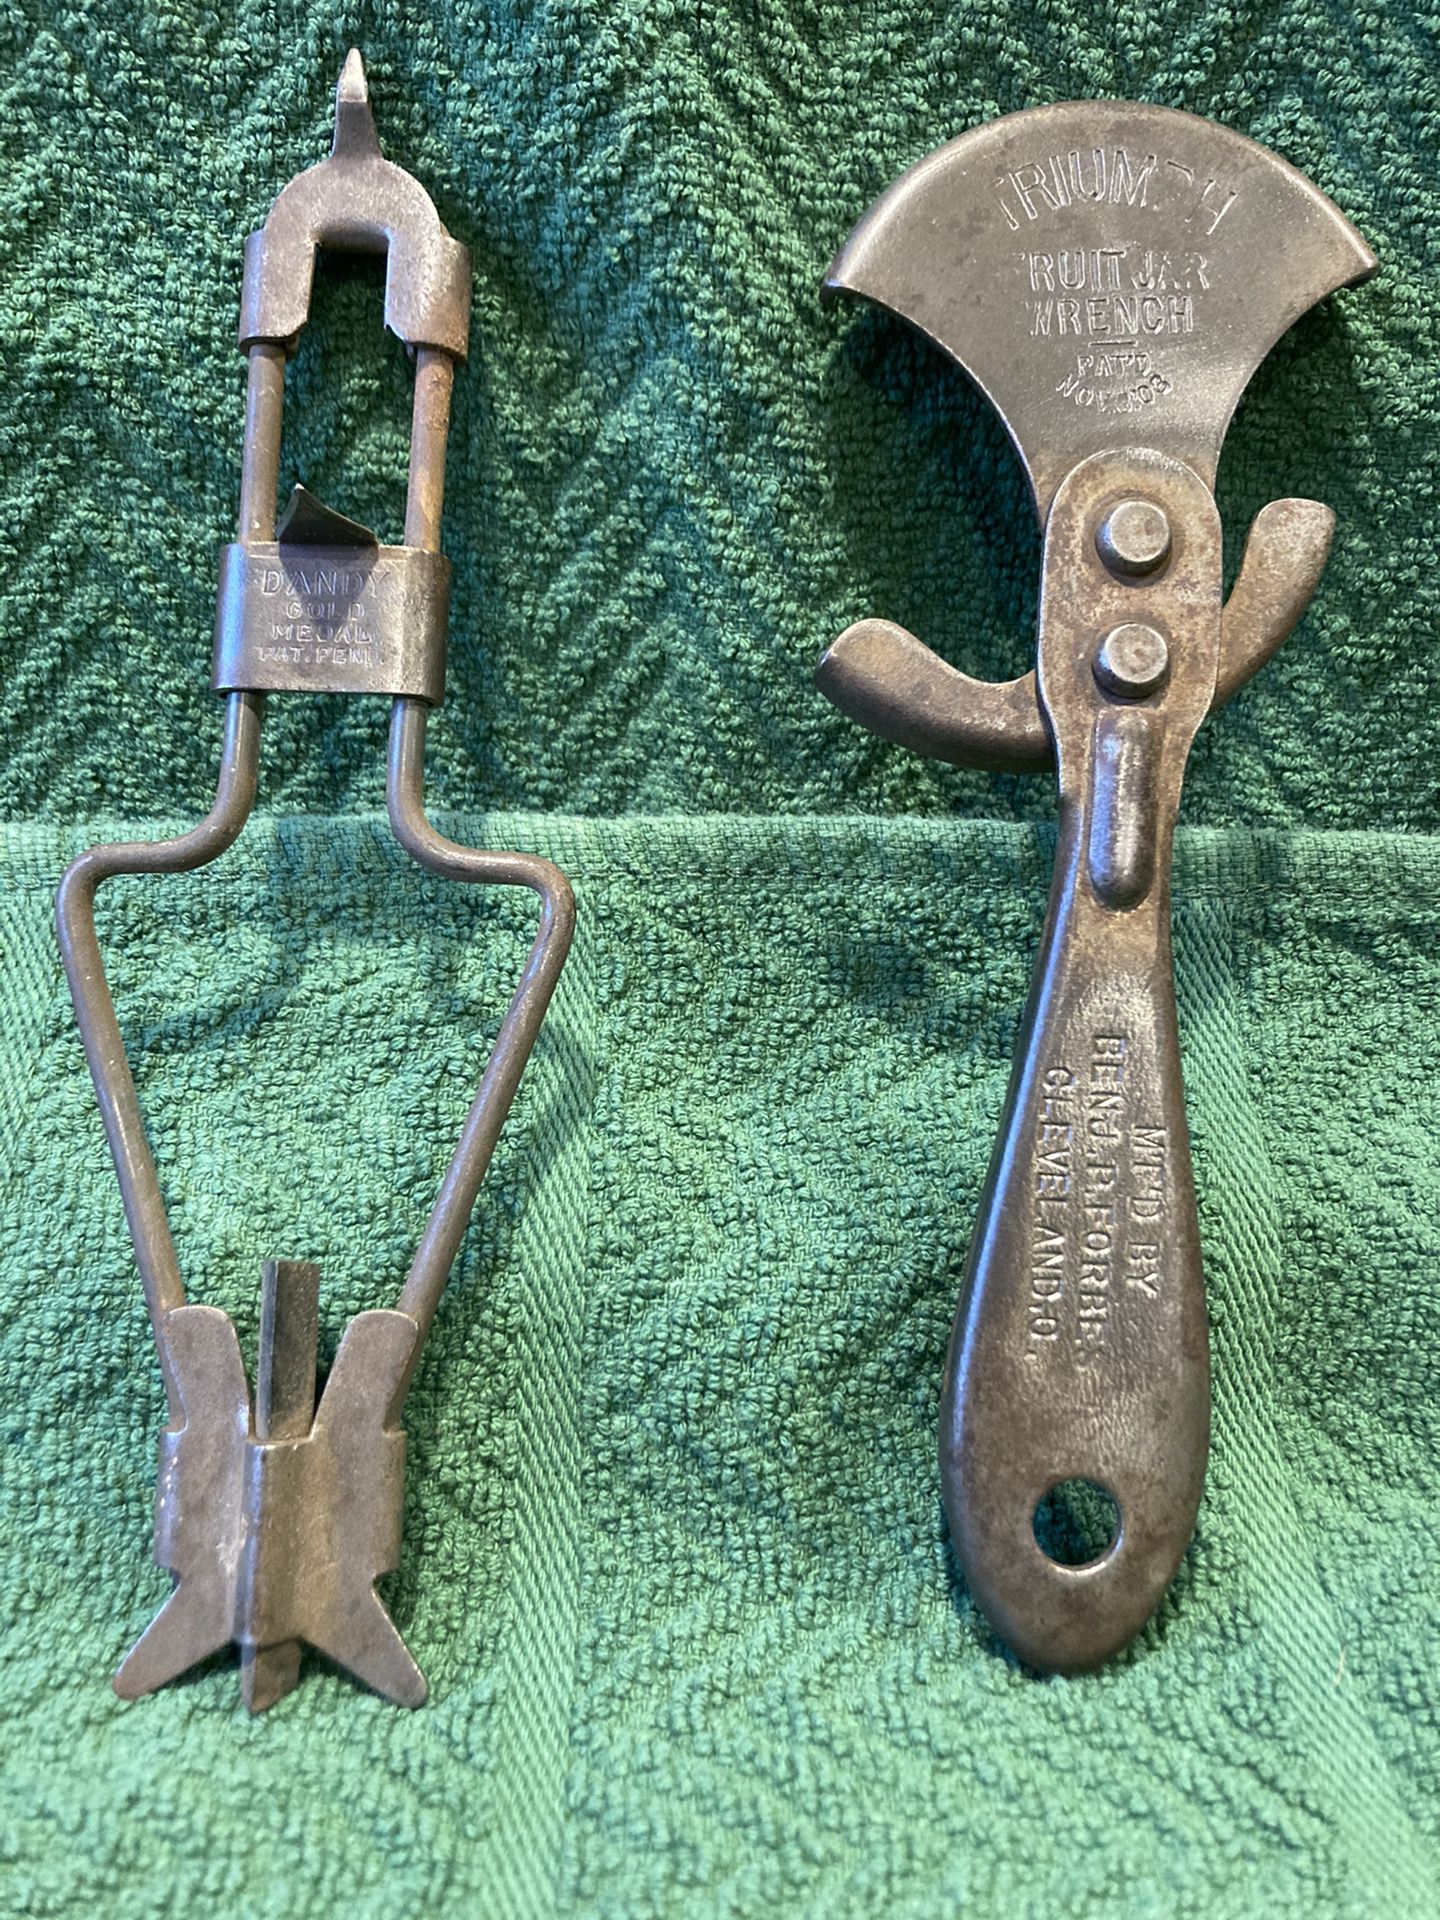 Vintage Can Opener And Jar Wrench